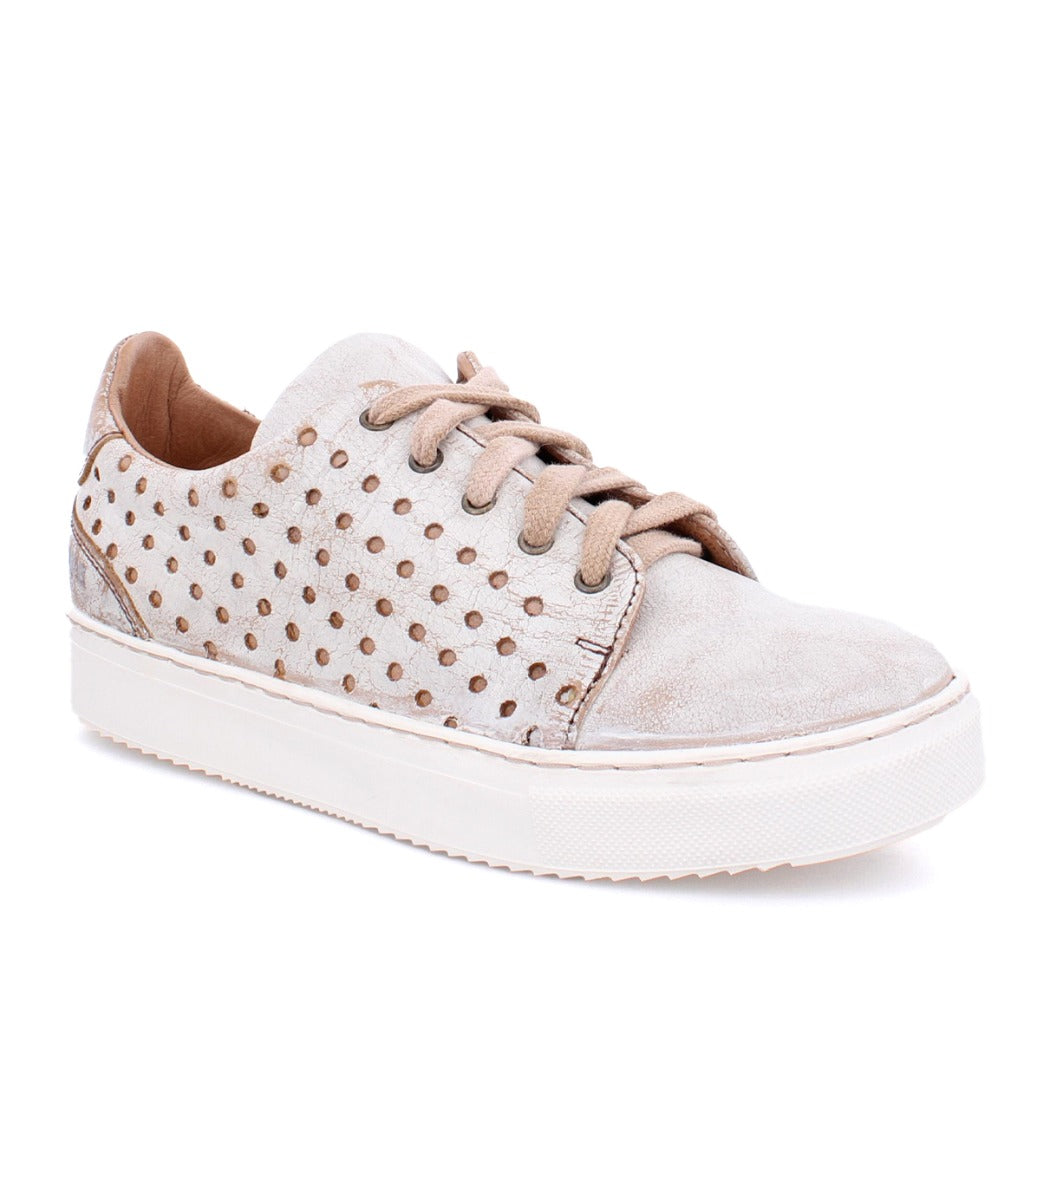 A women's beige Lyne sneaker with studded detailing by Bed Stu.